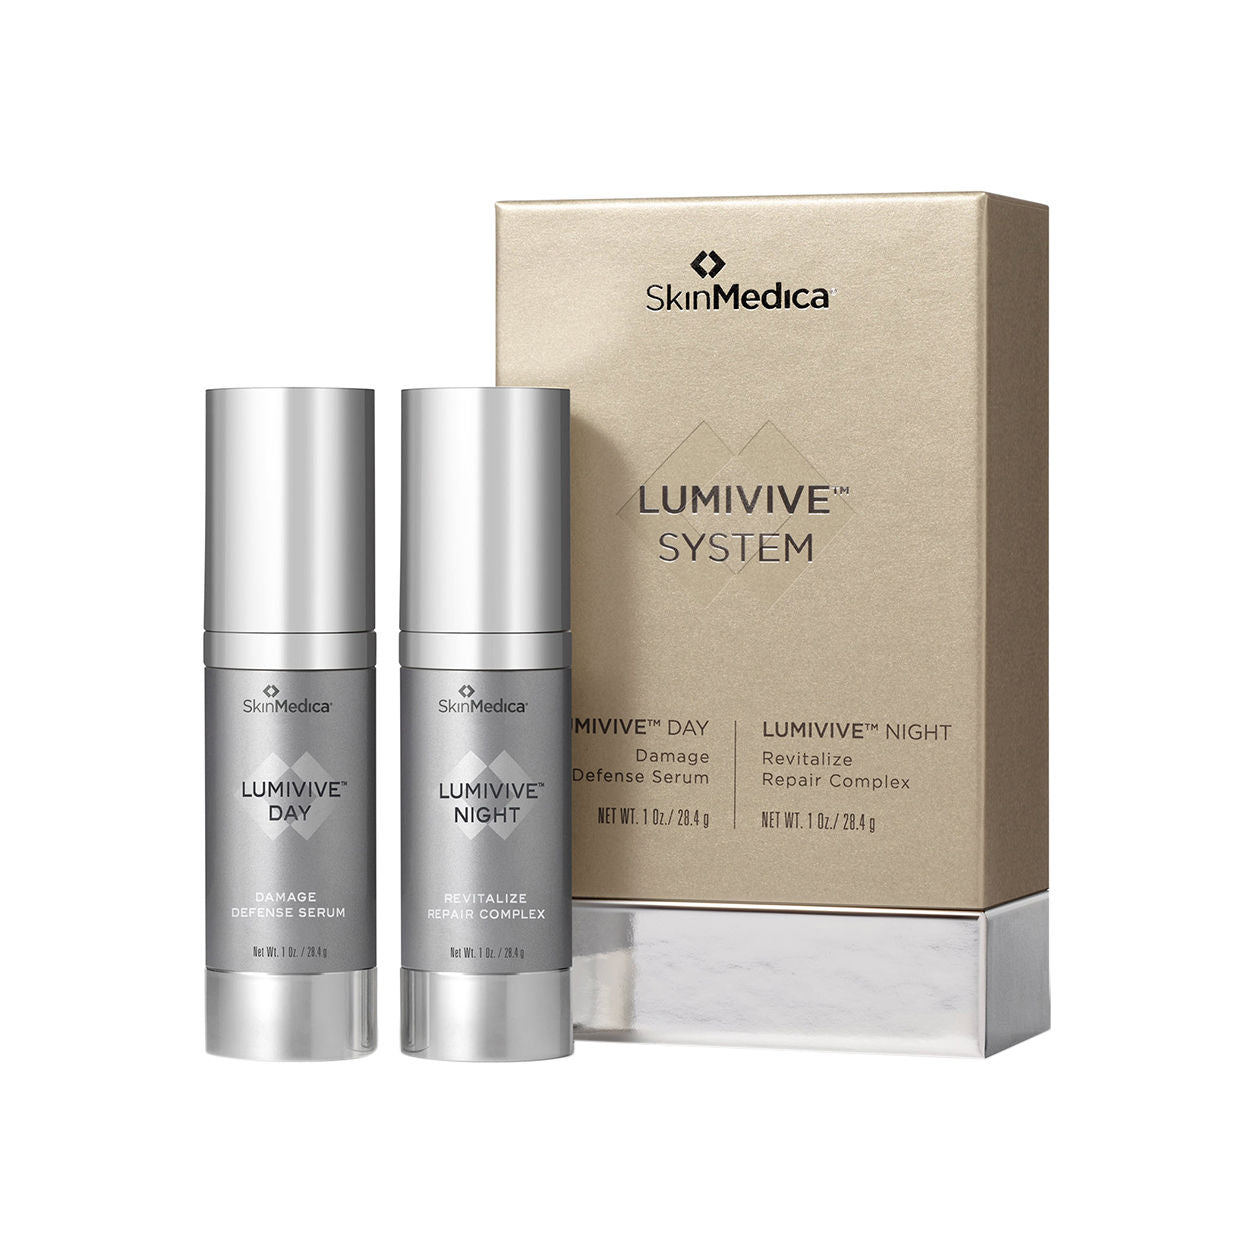 SkinMedica Lumivive System, Day and Night main image